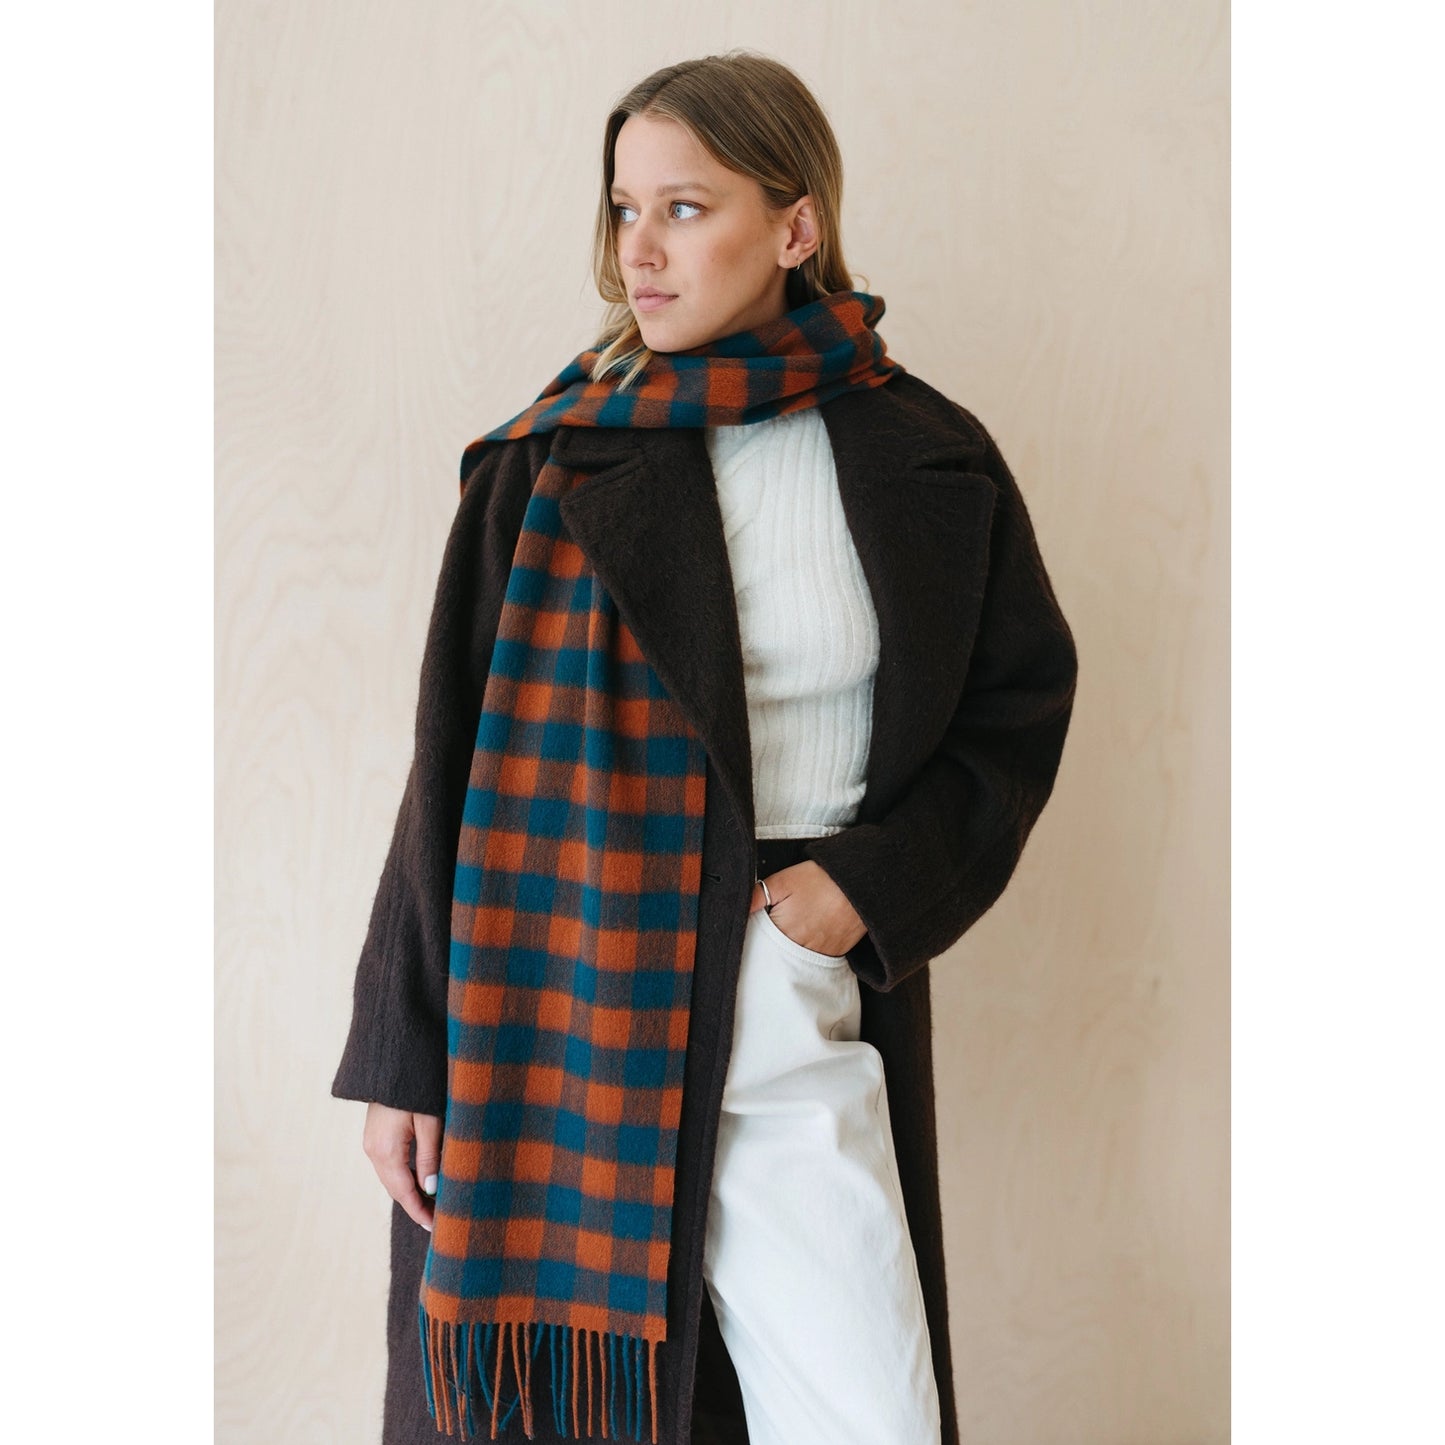 100% Lambswool gingham scarf in blue/brown